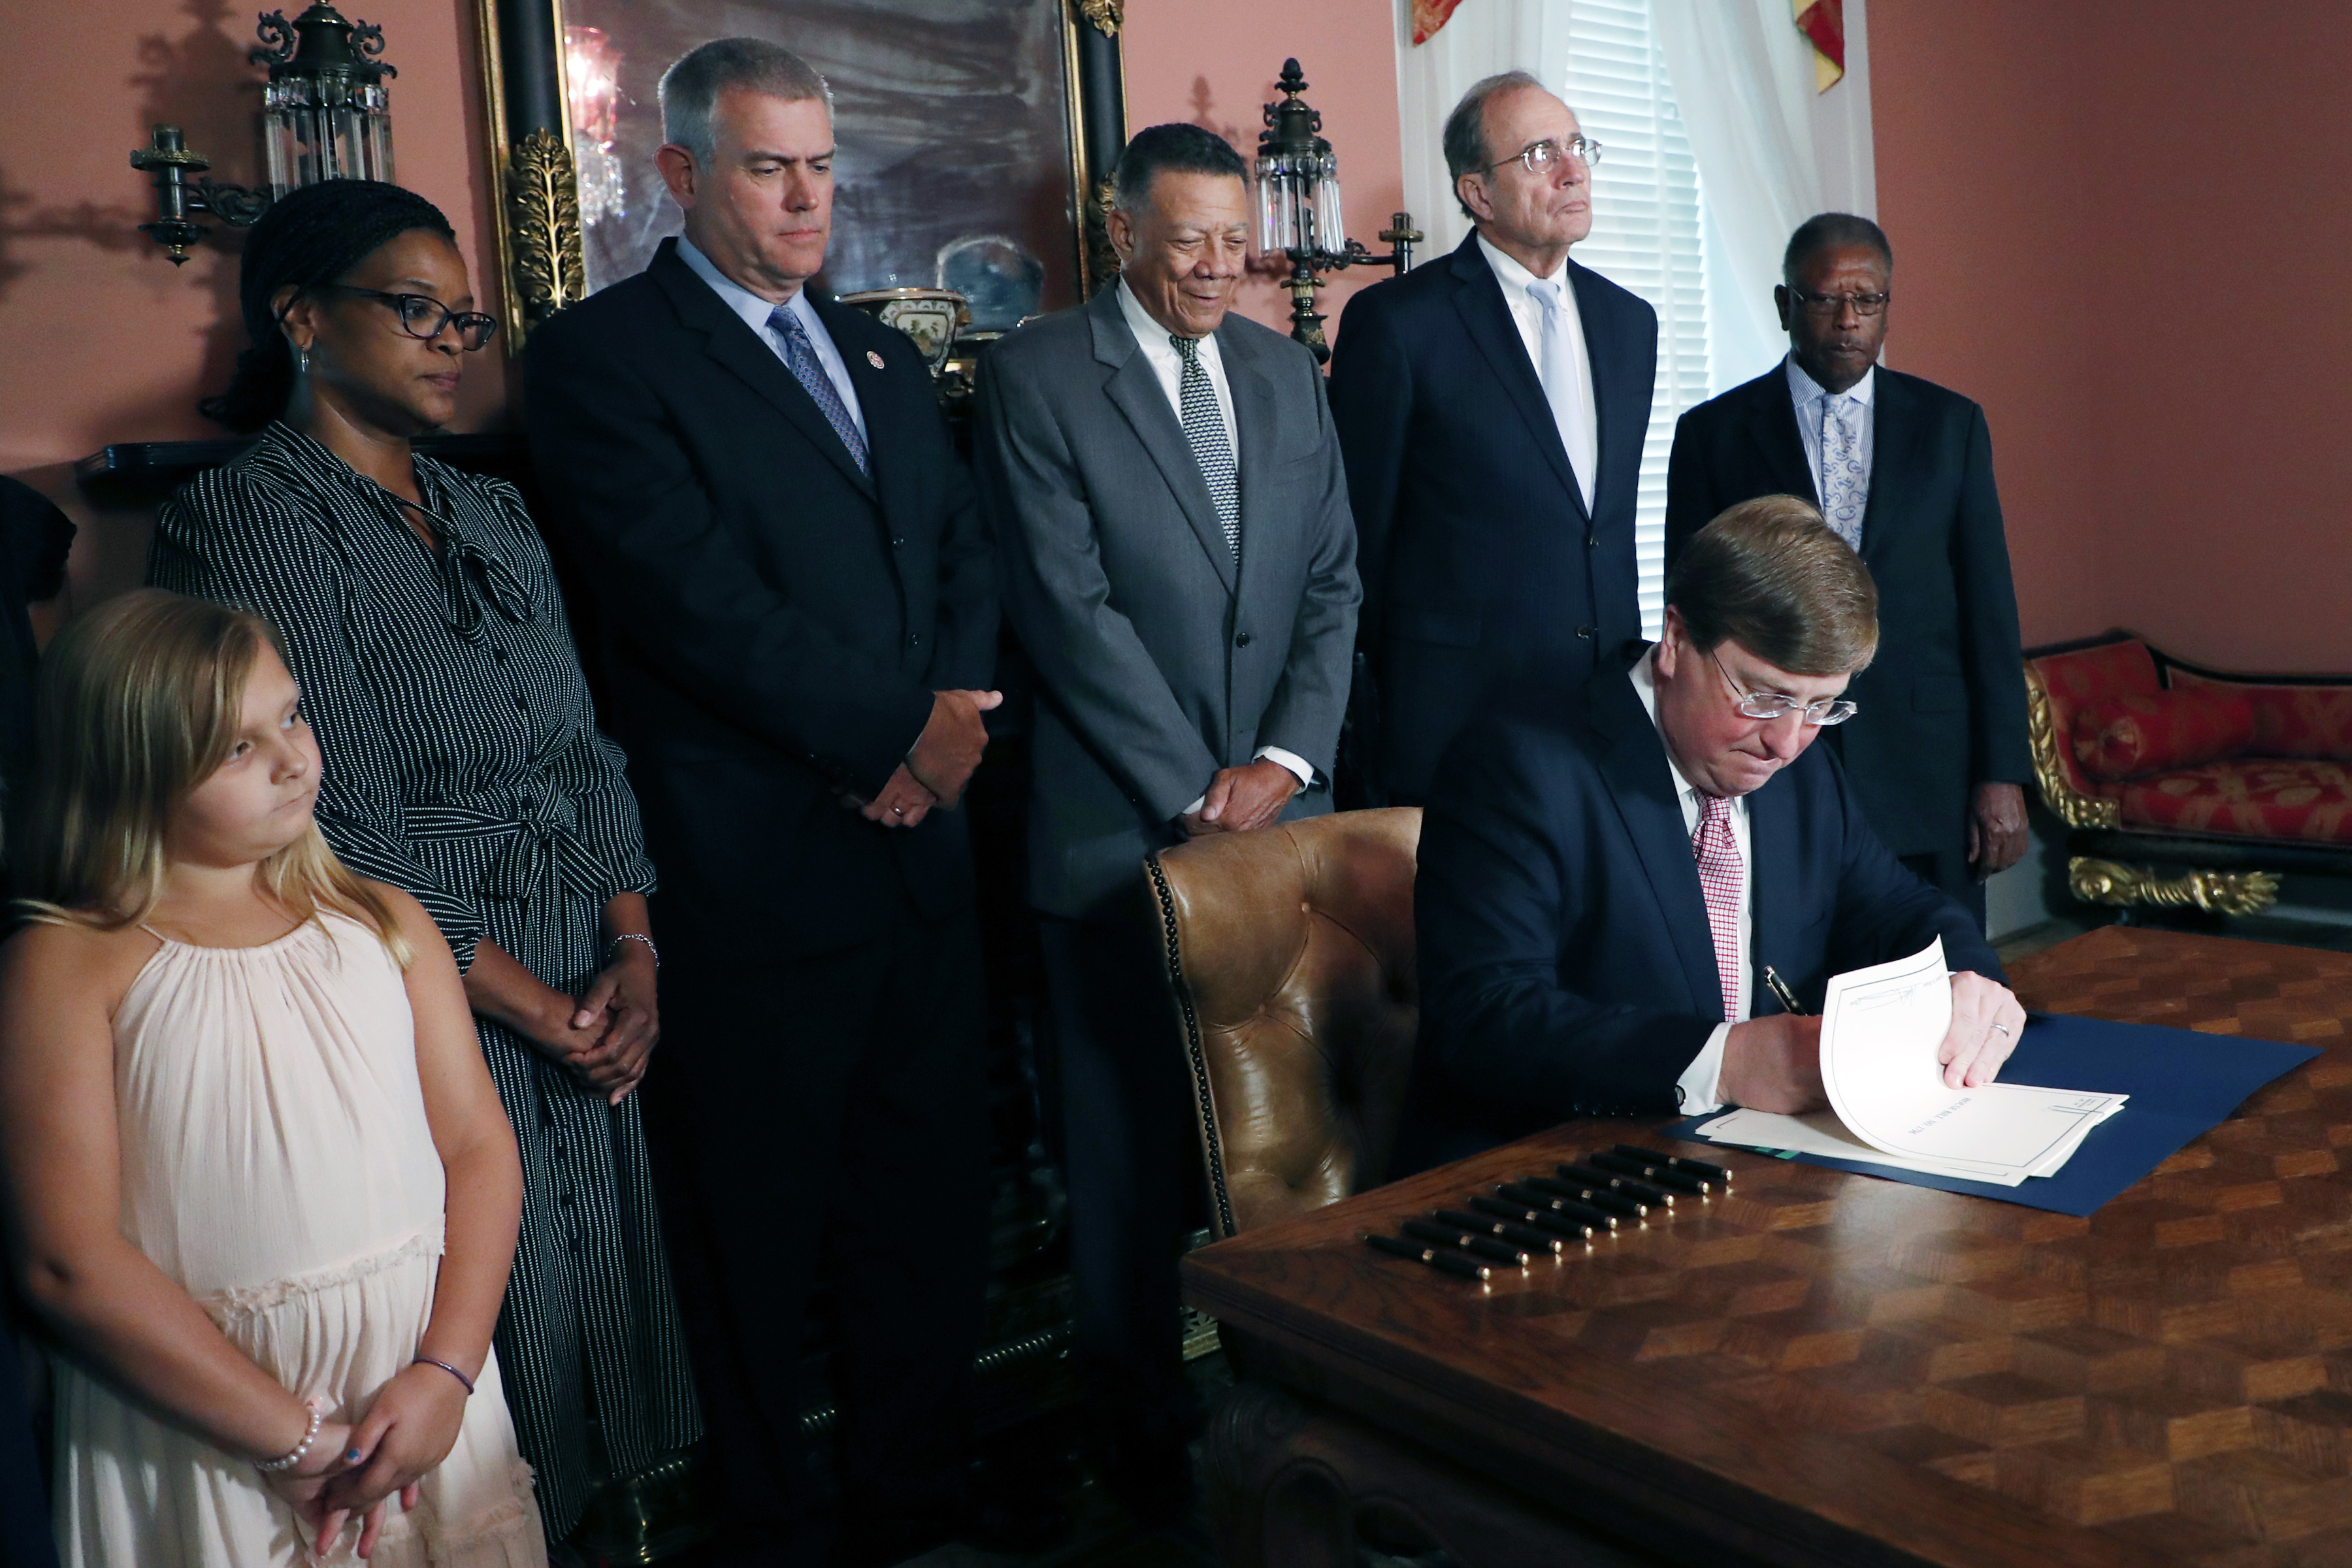 Mississippi Republican Gov. Tate Reeves signs the bill retiring the last state flag with the Confederate battle emblem during a ceremony at the Governor's Mansion in Jackson, Mississippi on June 30, 2020. (Photo: Rogelio V. Solis/ POOL/AFP via Getty Images)